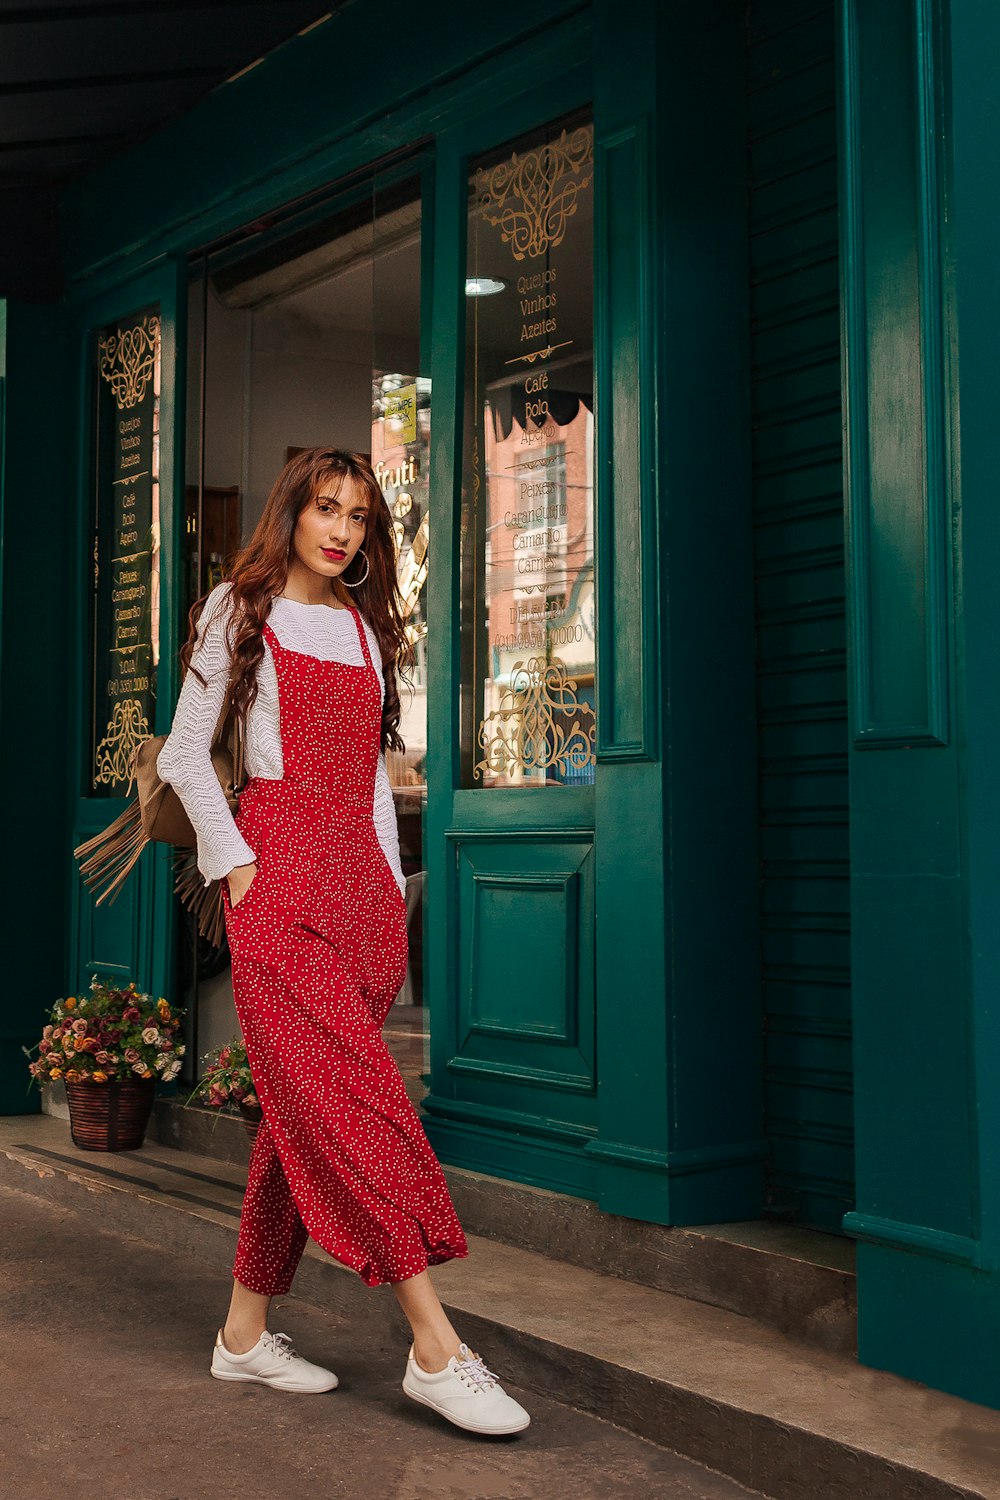 woman in red and white dress standing beside blue wooden door during daytime